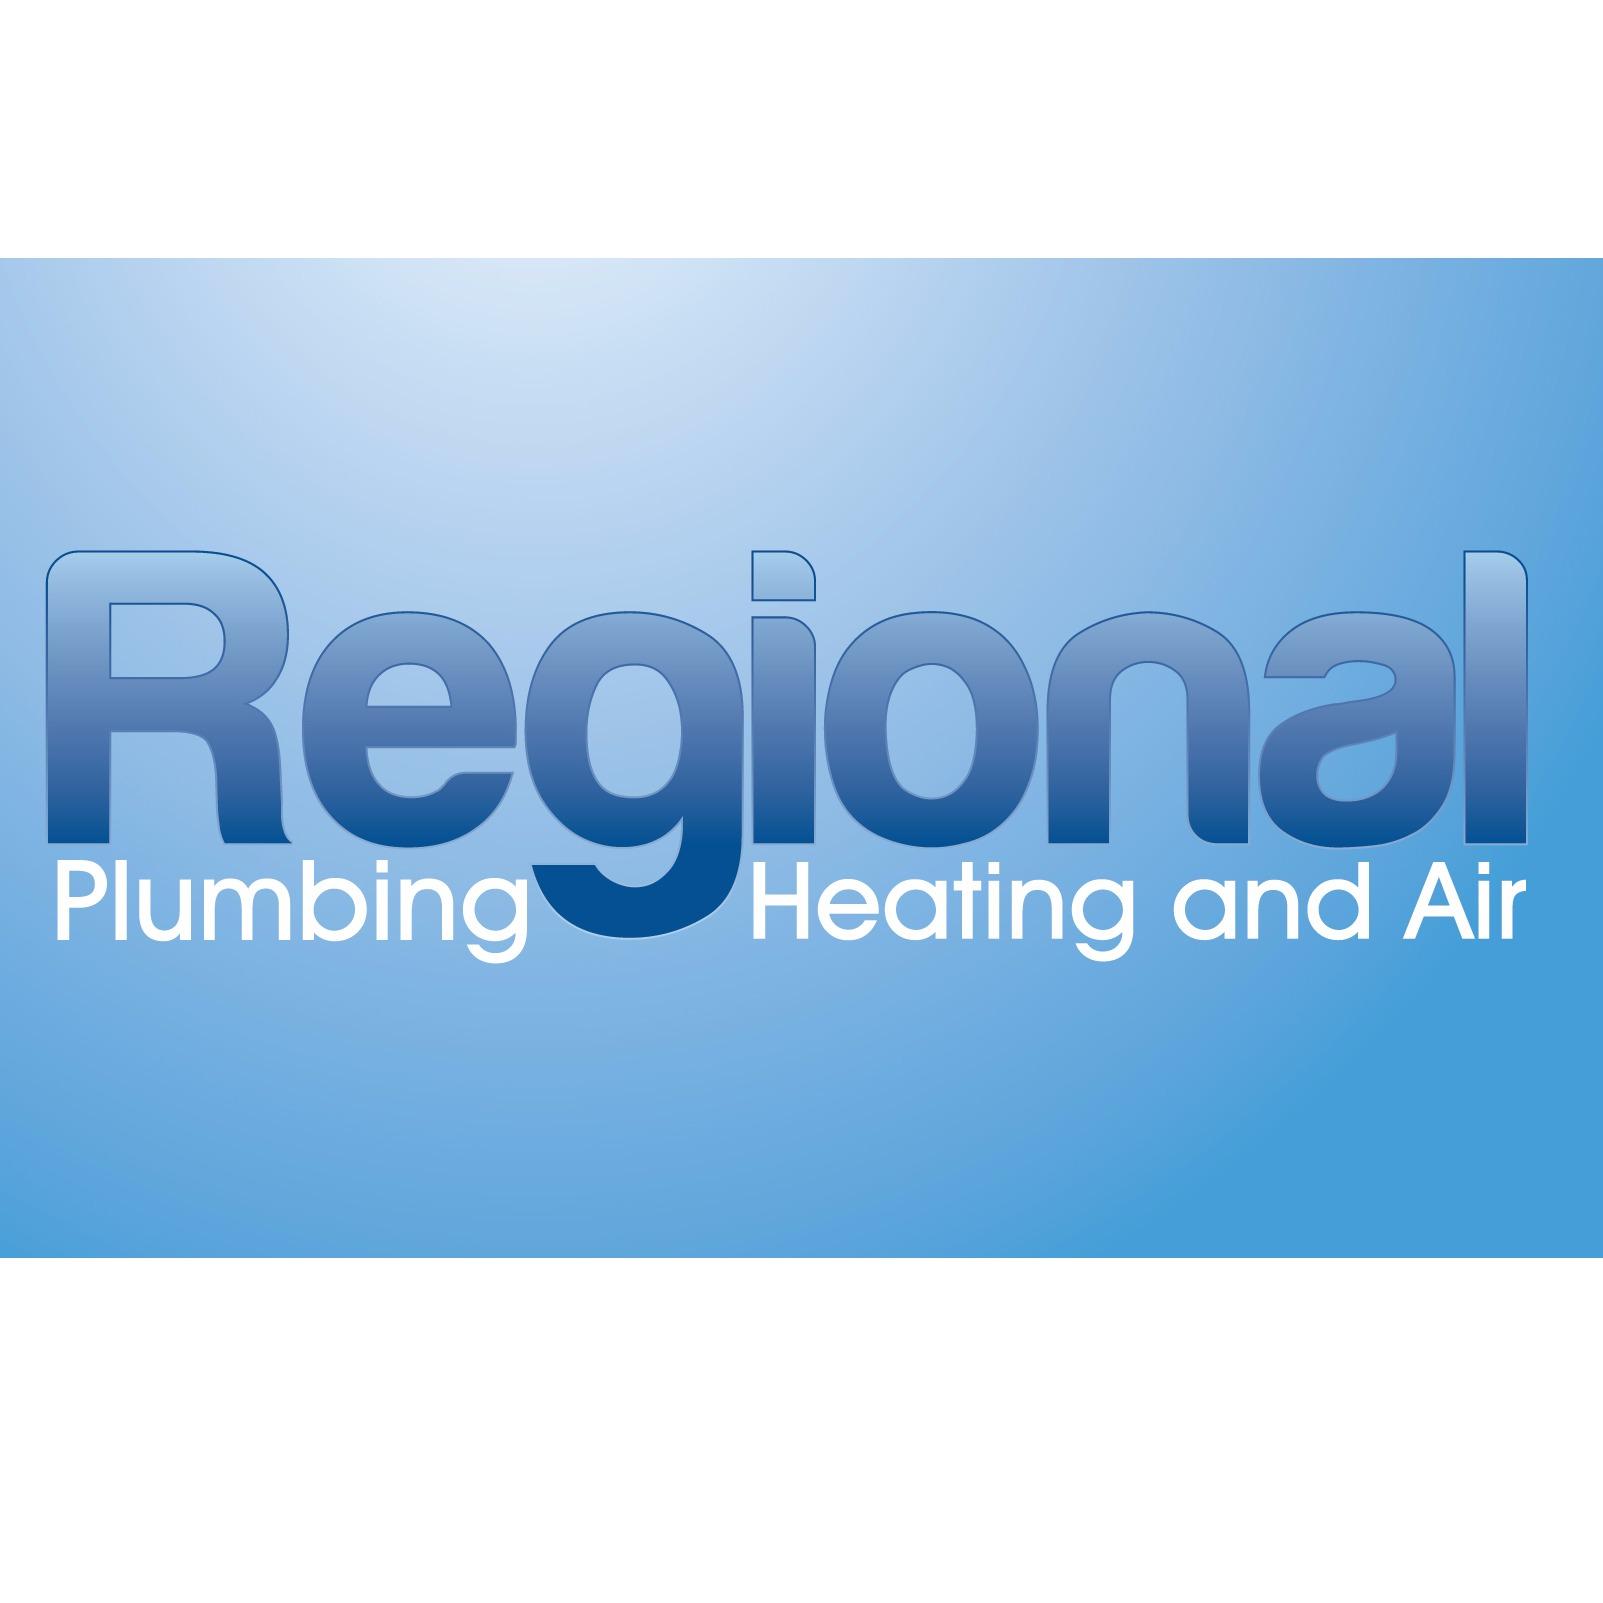 Regional Plumbing, Heating and Air - Valparaiso, IN 46383 - (219)465-0822 | ShowMeLocal.com